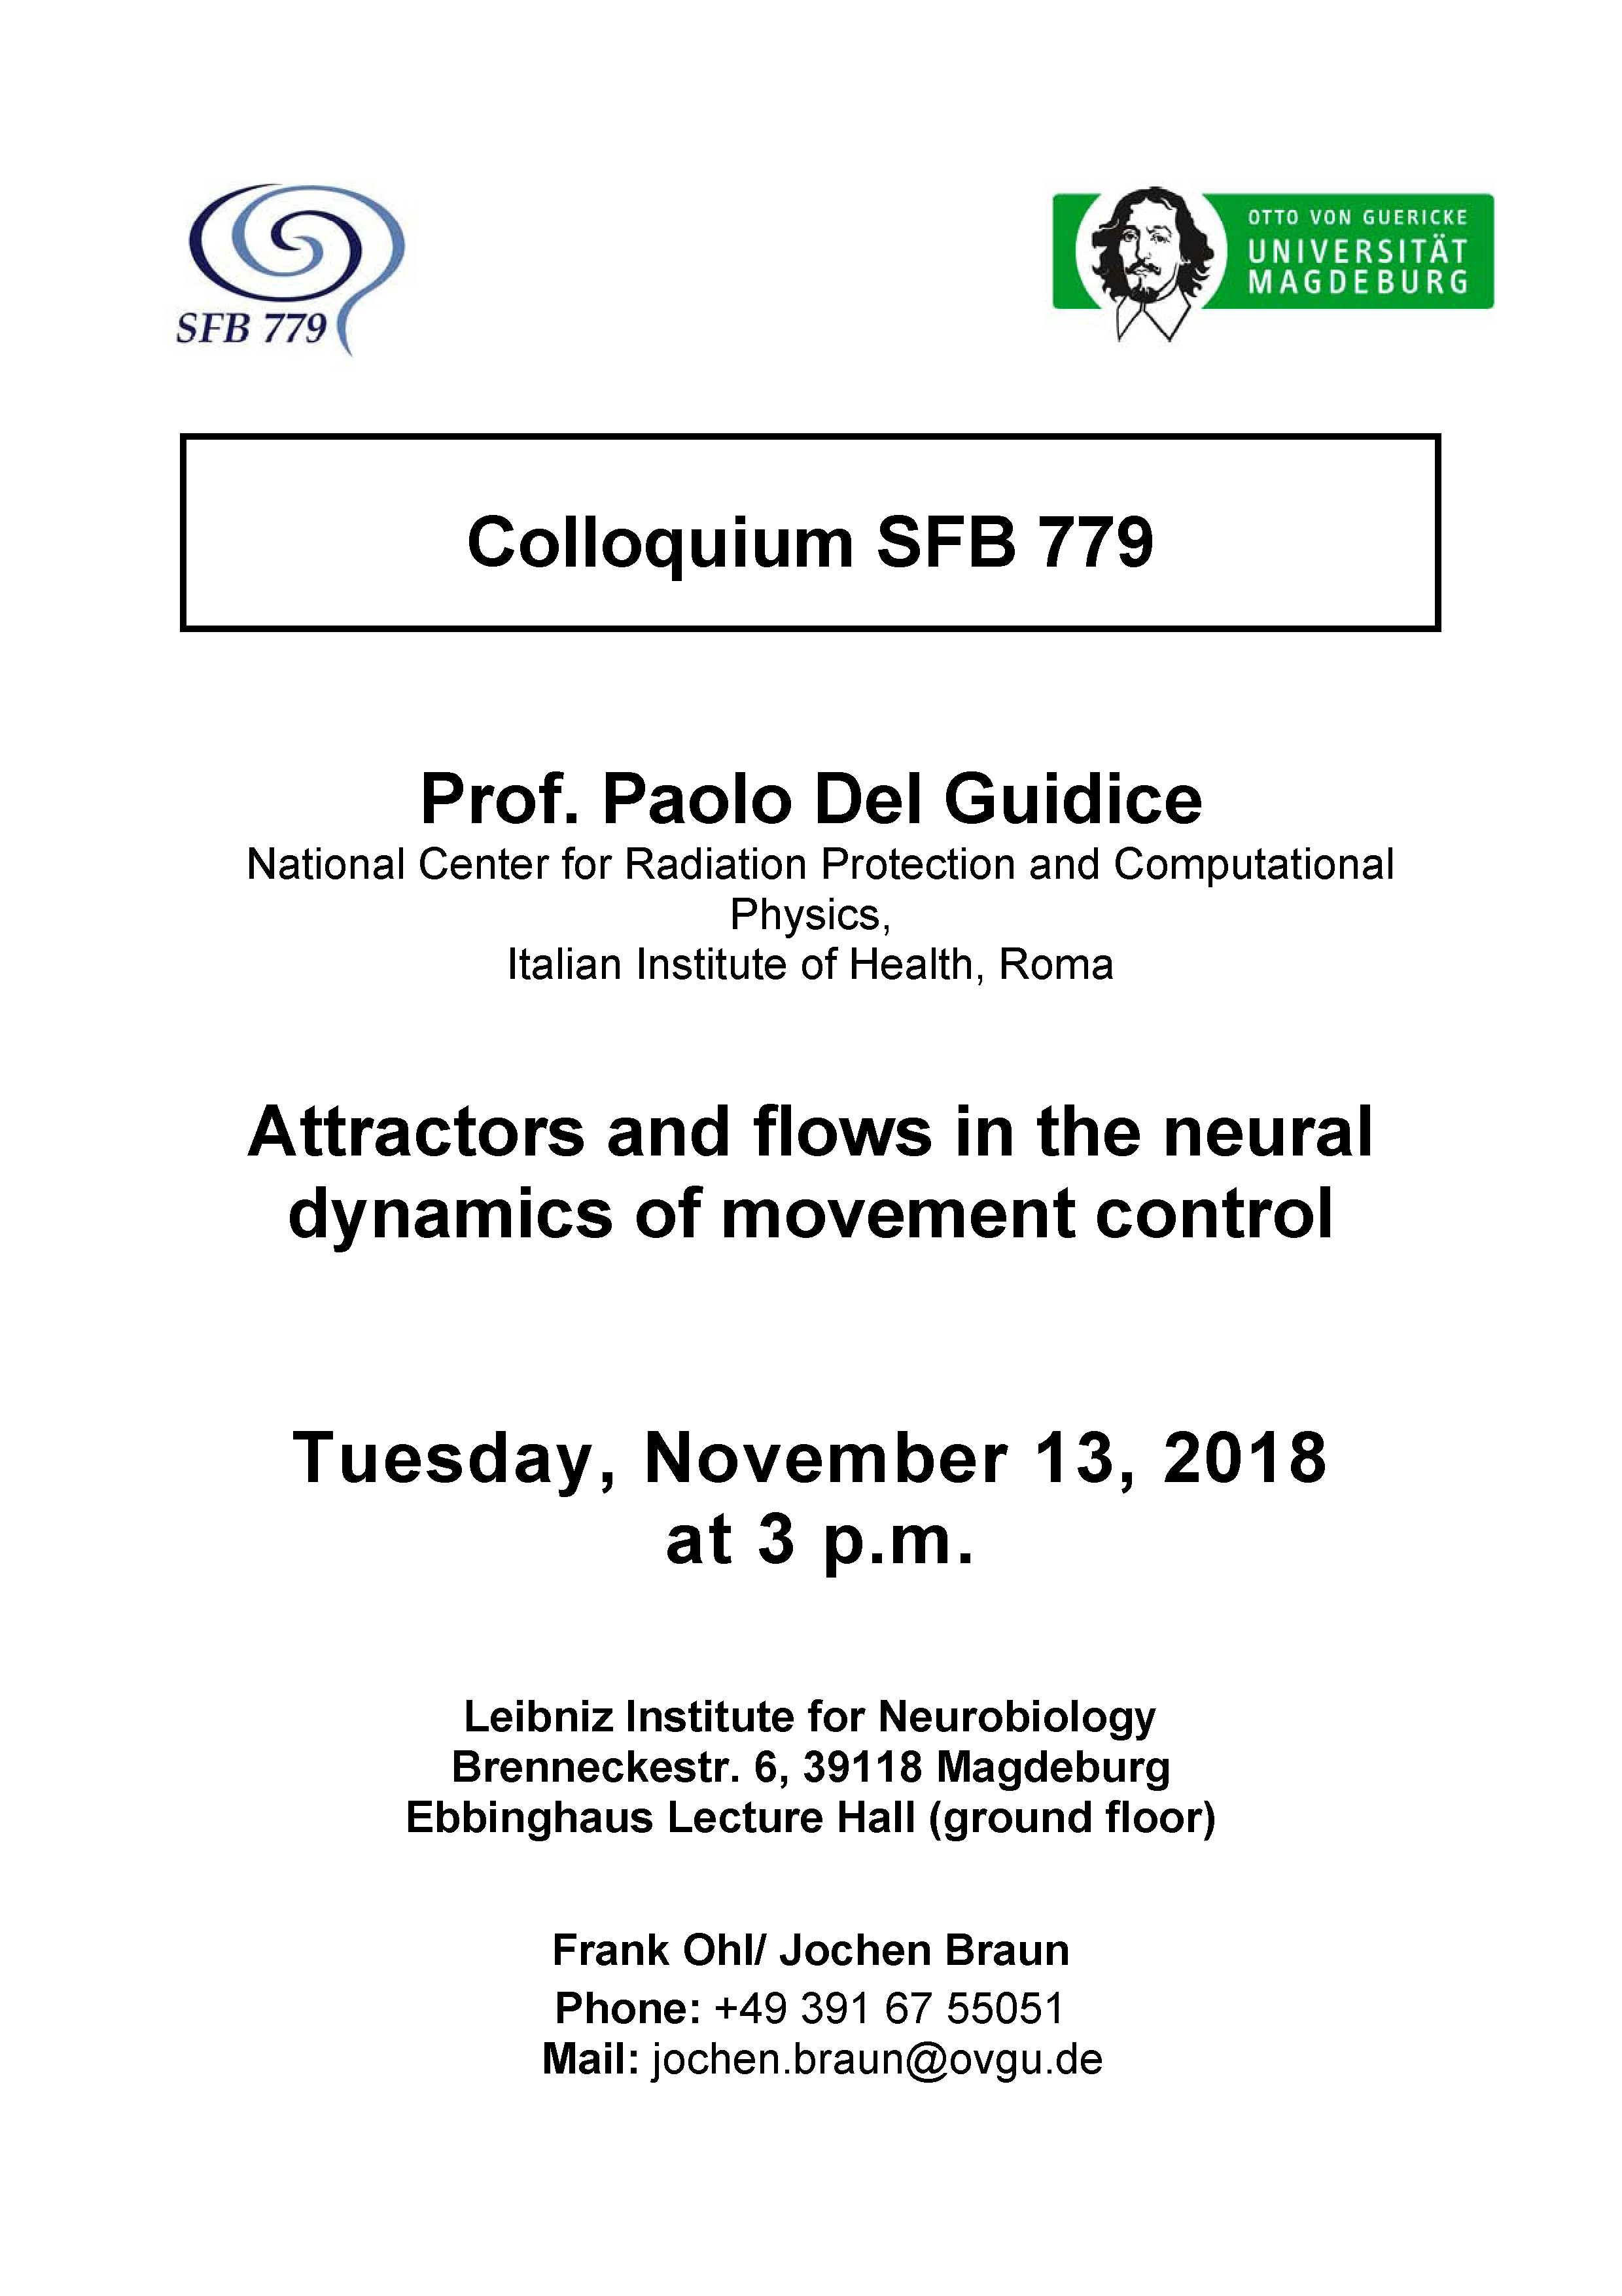 Sfb 779 Colloquium Attractors And Flows In The Neural Dynamics Of